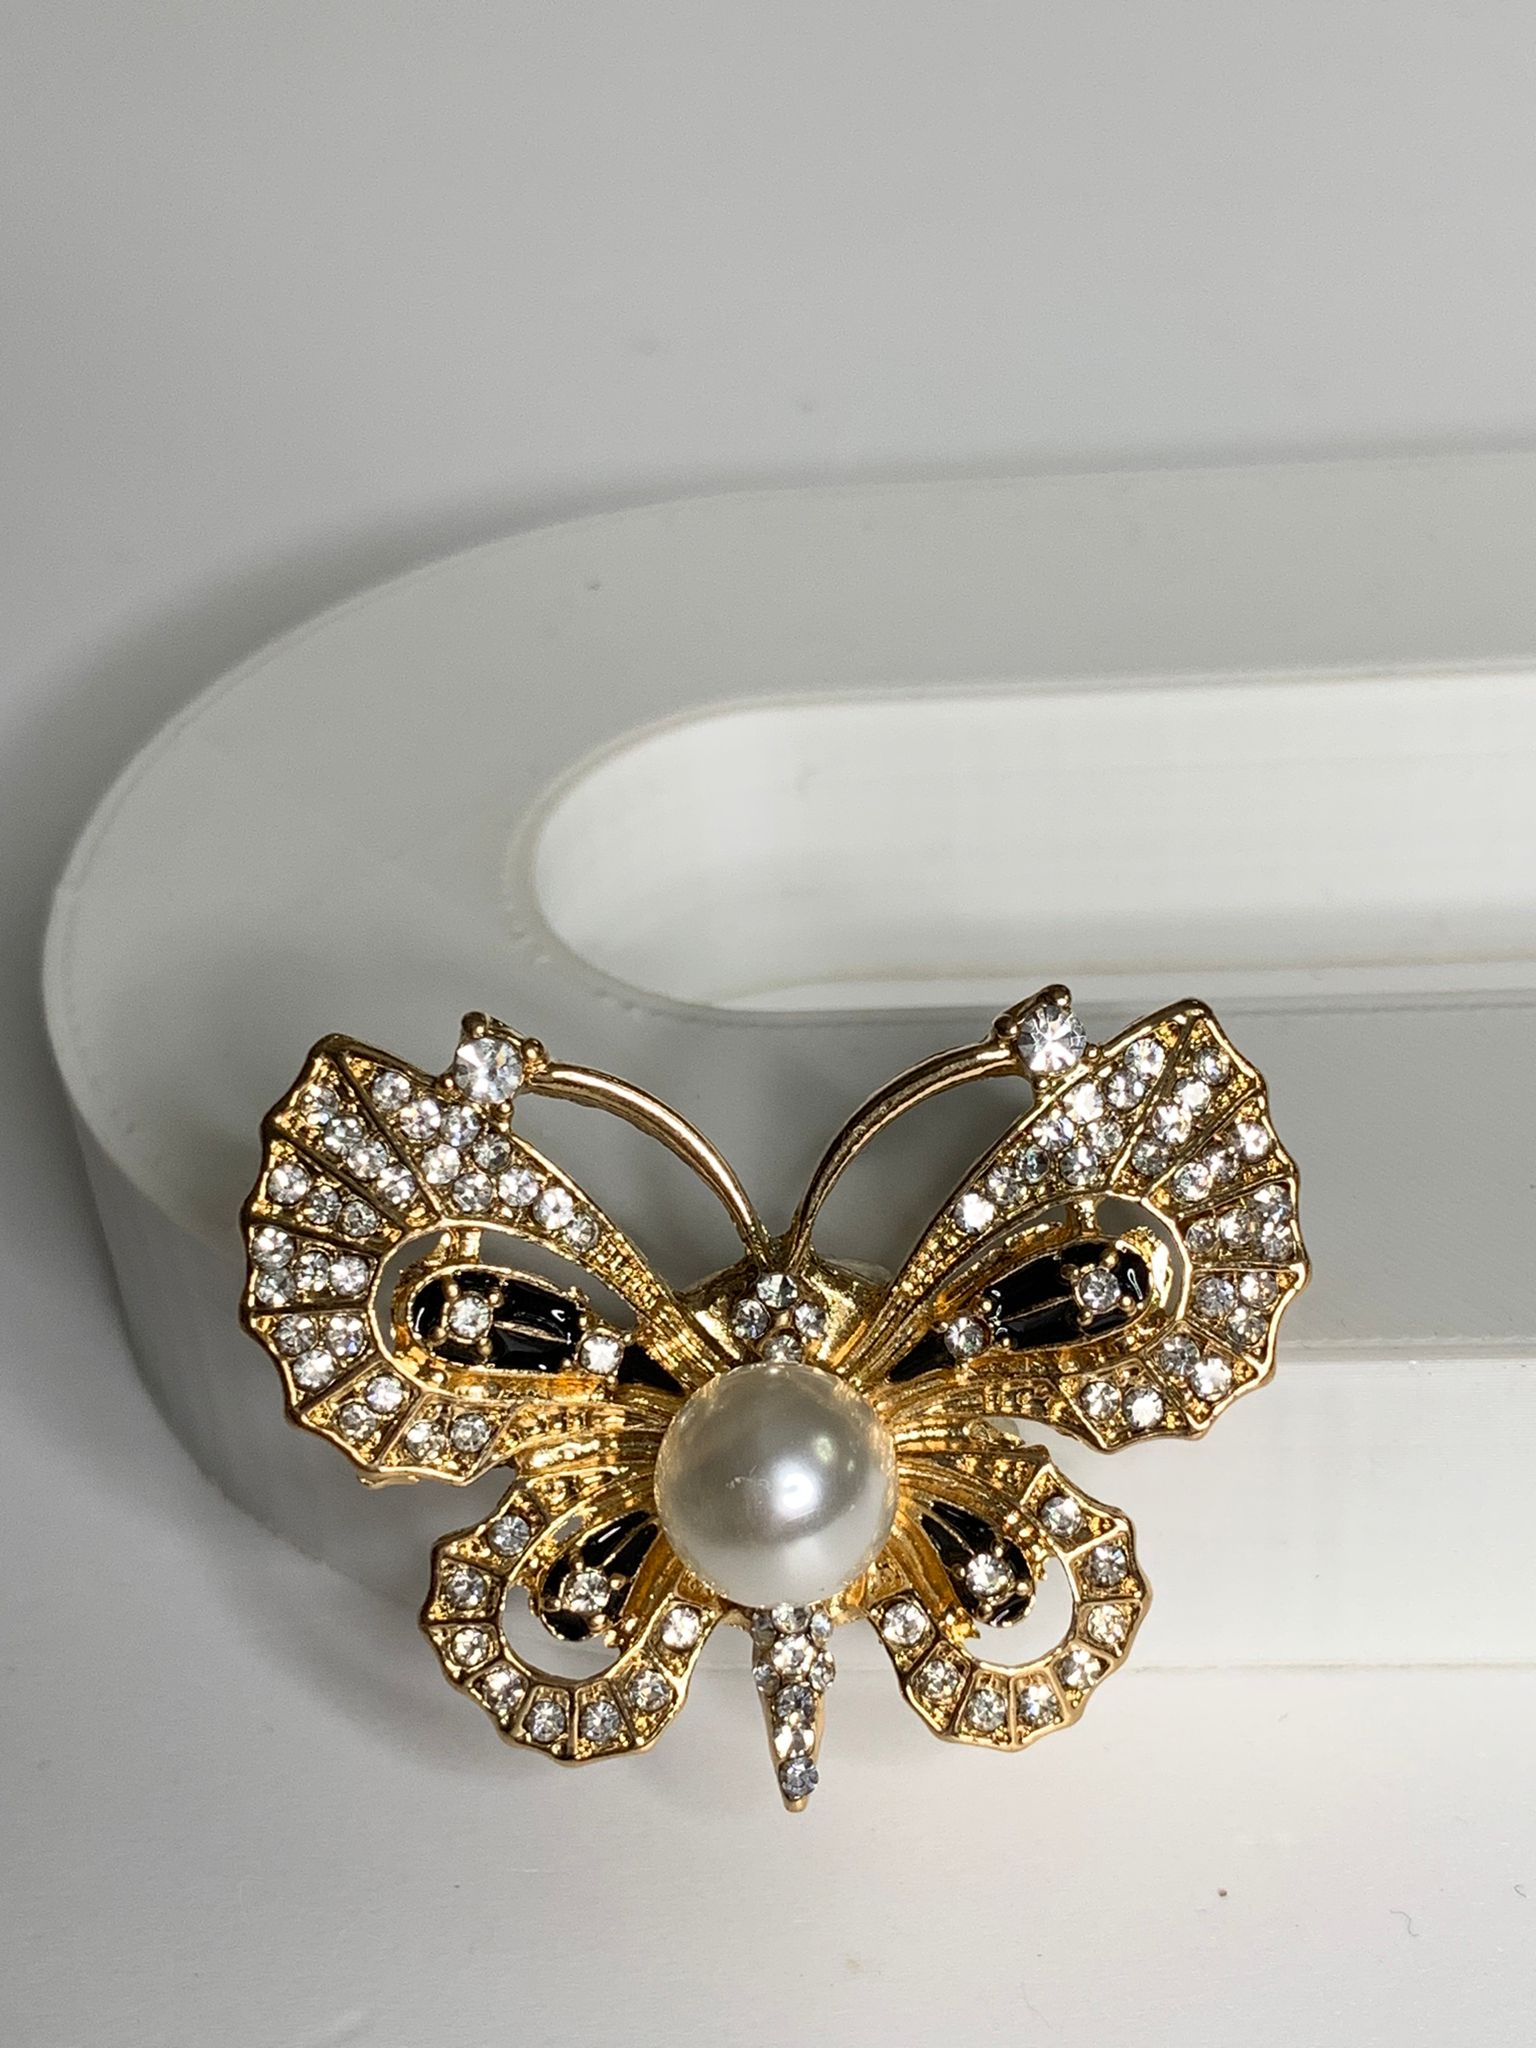 Magnetic brooch & scarf clip - 'pearl butterfly' design in shades of shiny gold, diamanté silver and pewter